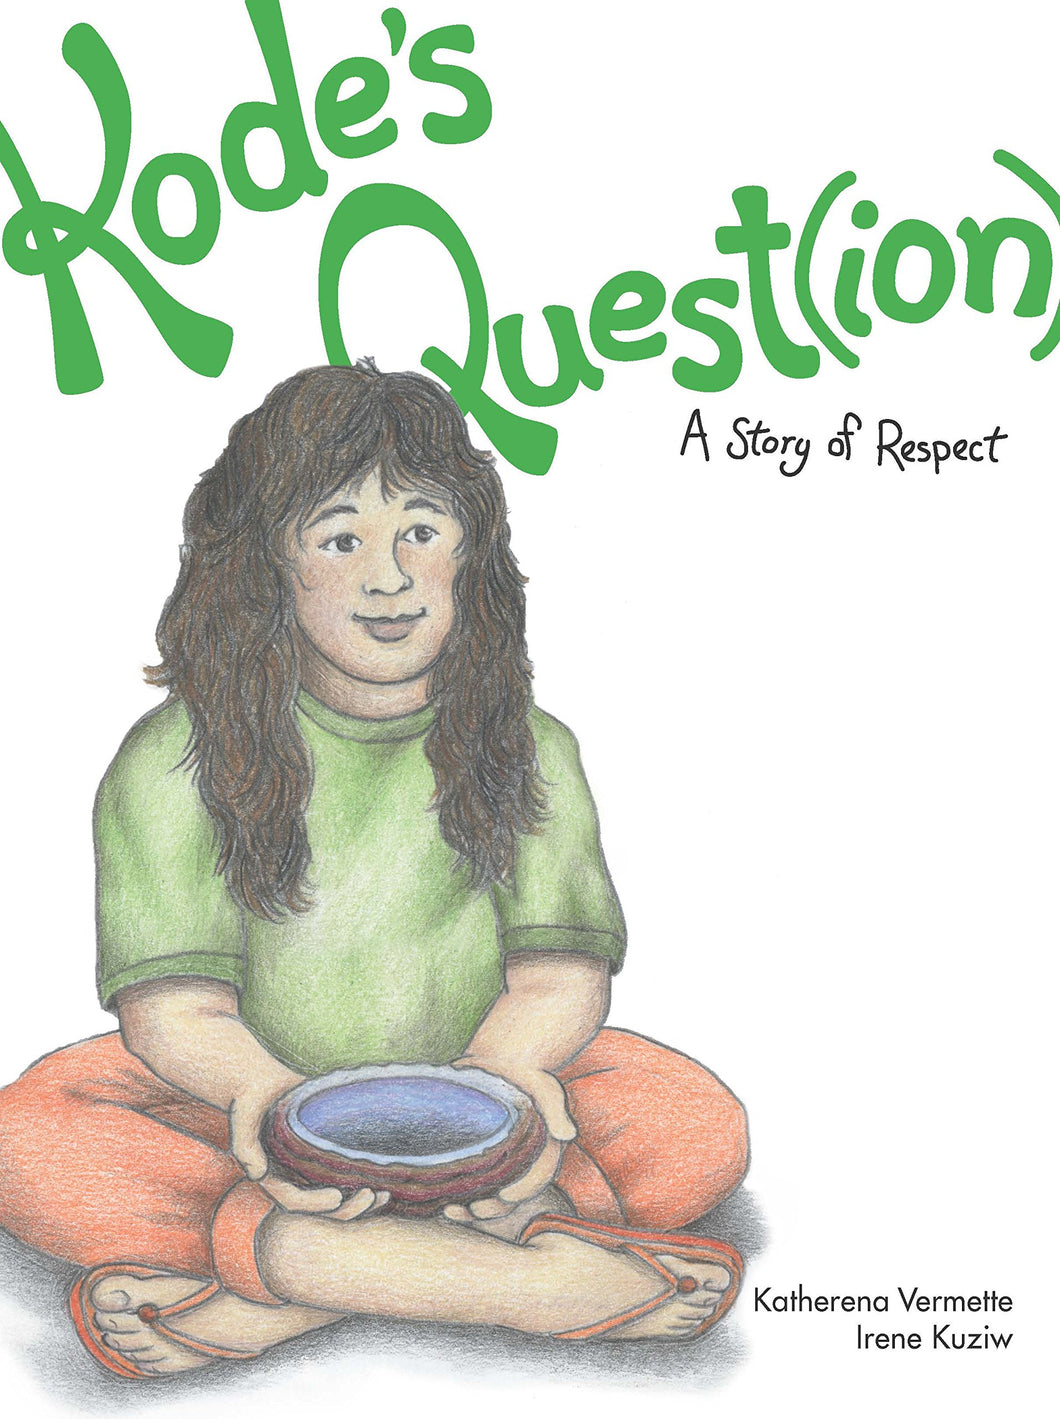 Kode's Quest(ion): A Story of Respect [Katherena Vermette]